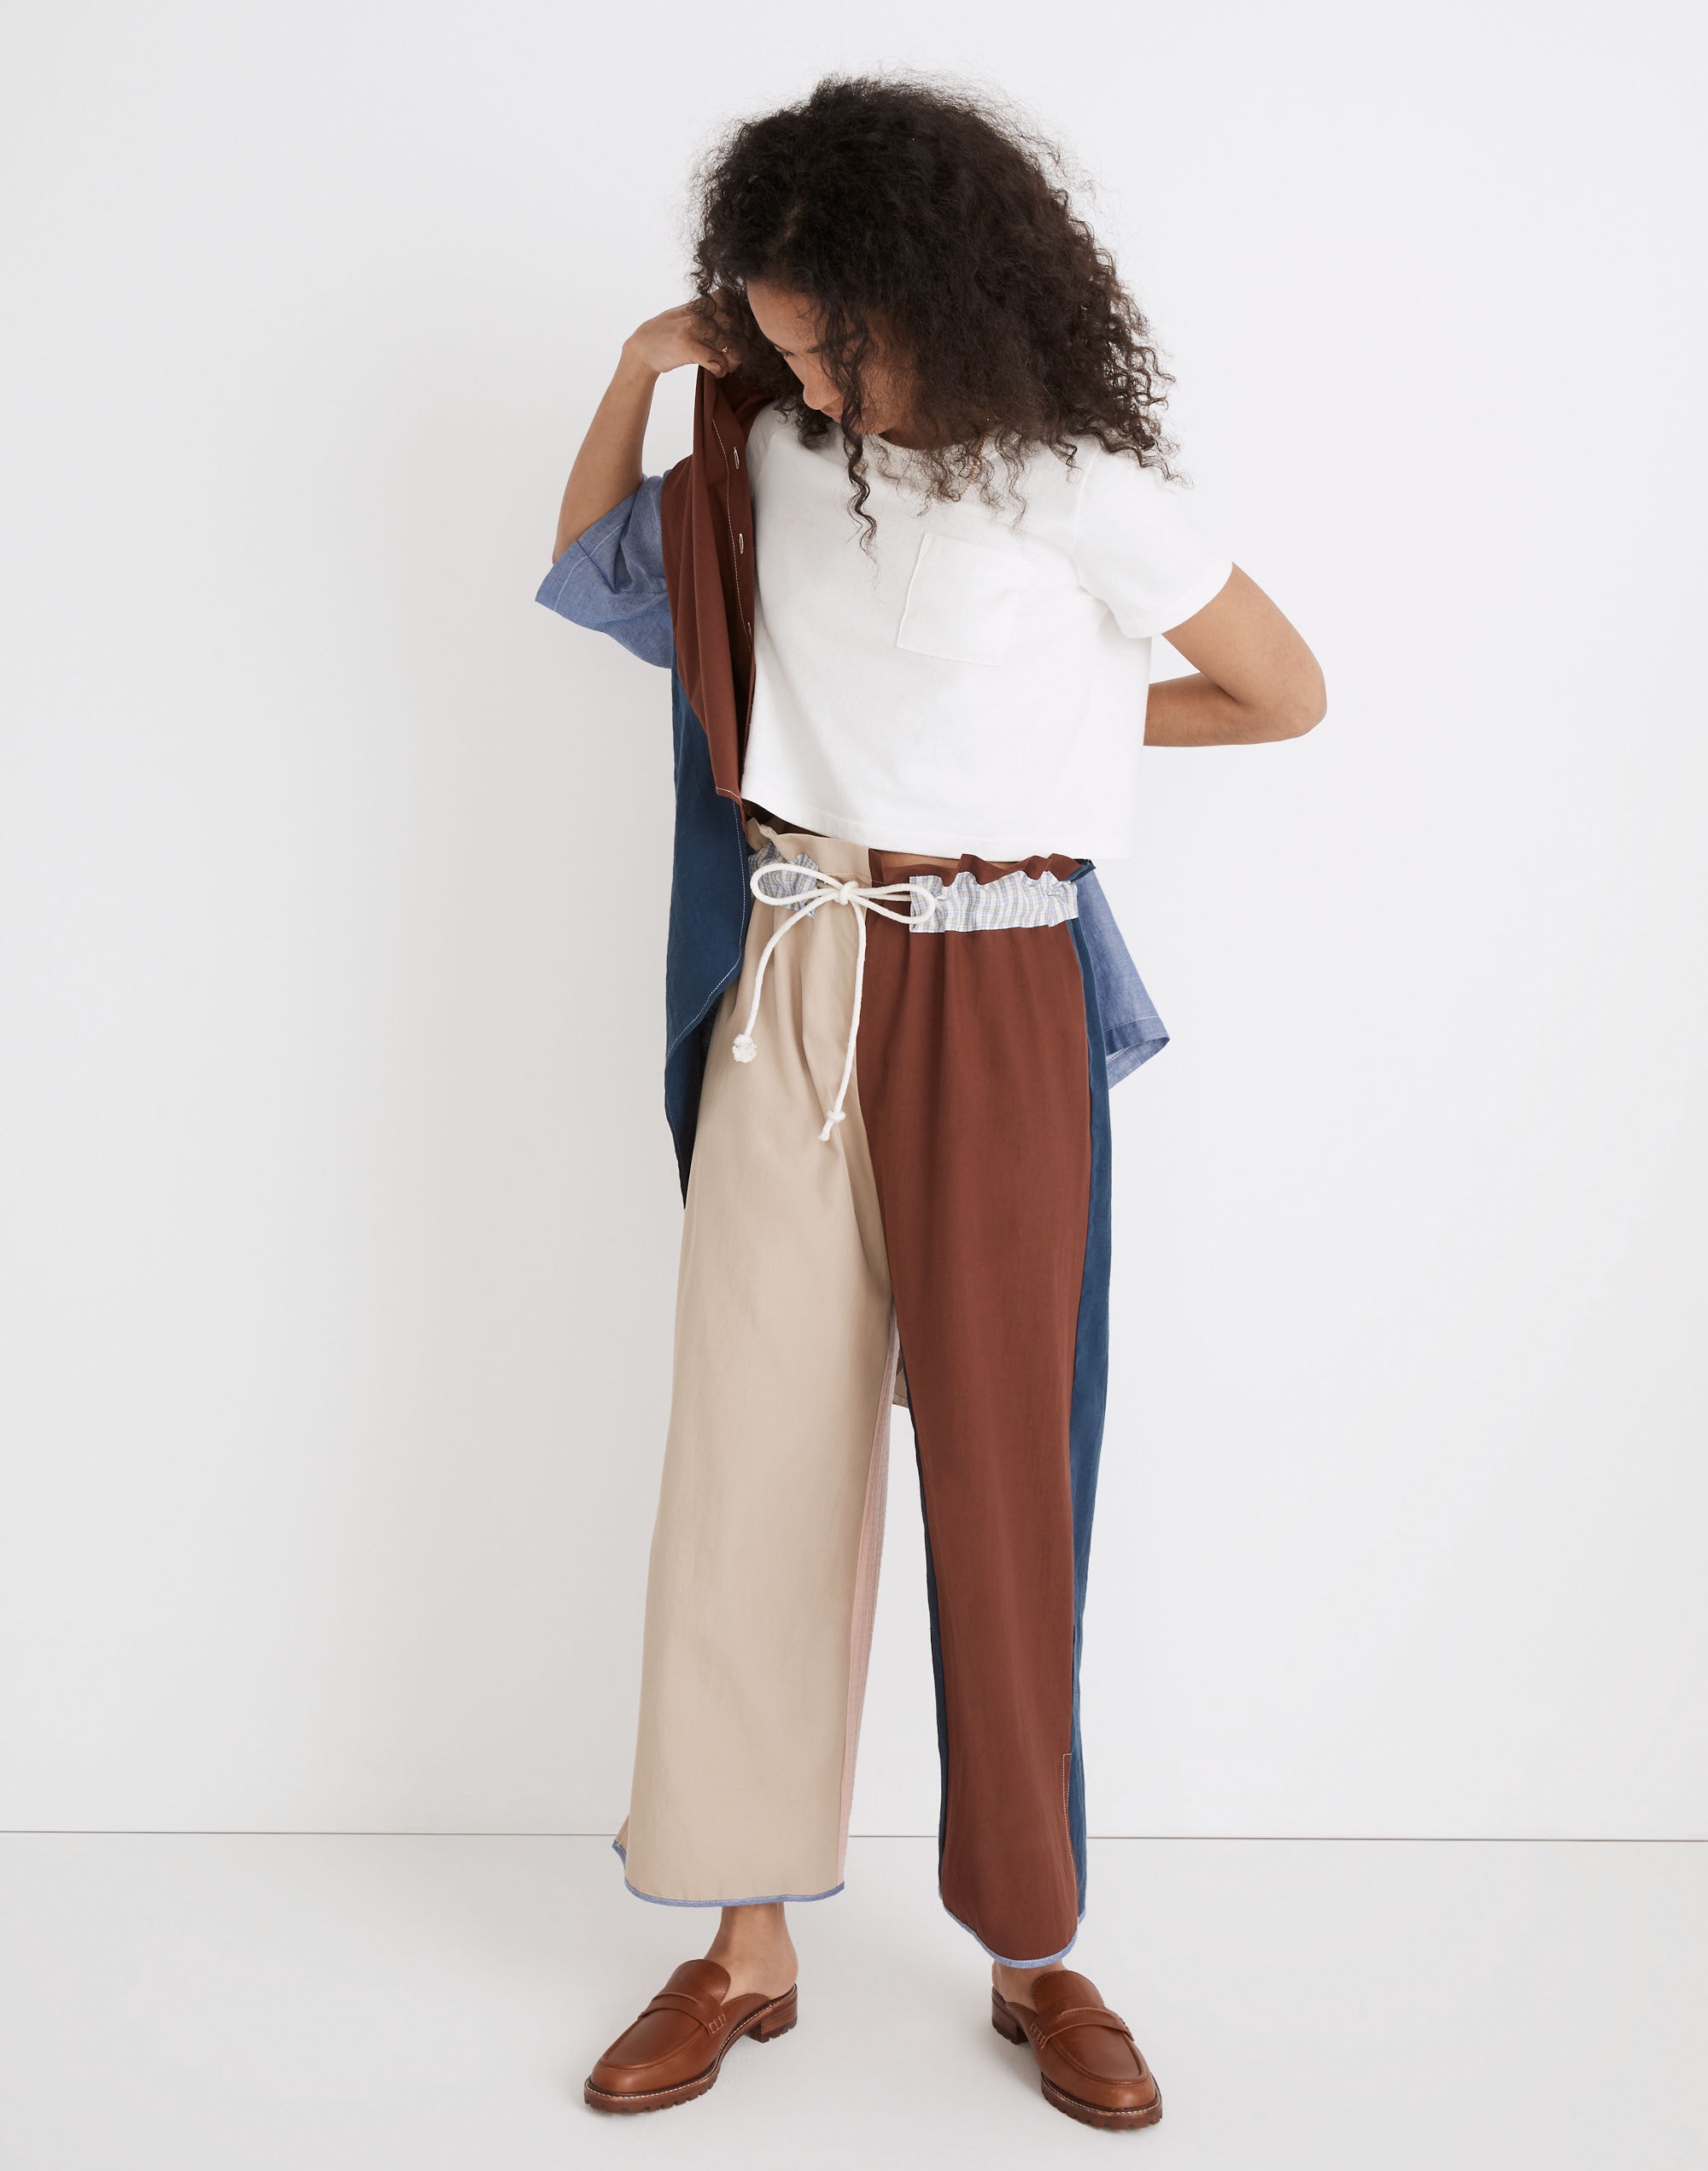 Madewell x La Réunion Upcycled Patchwork Paperbag Pants